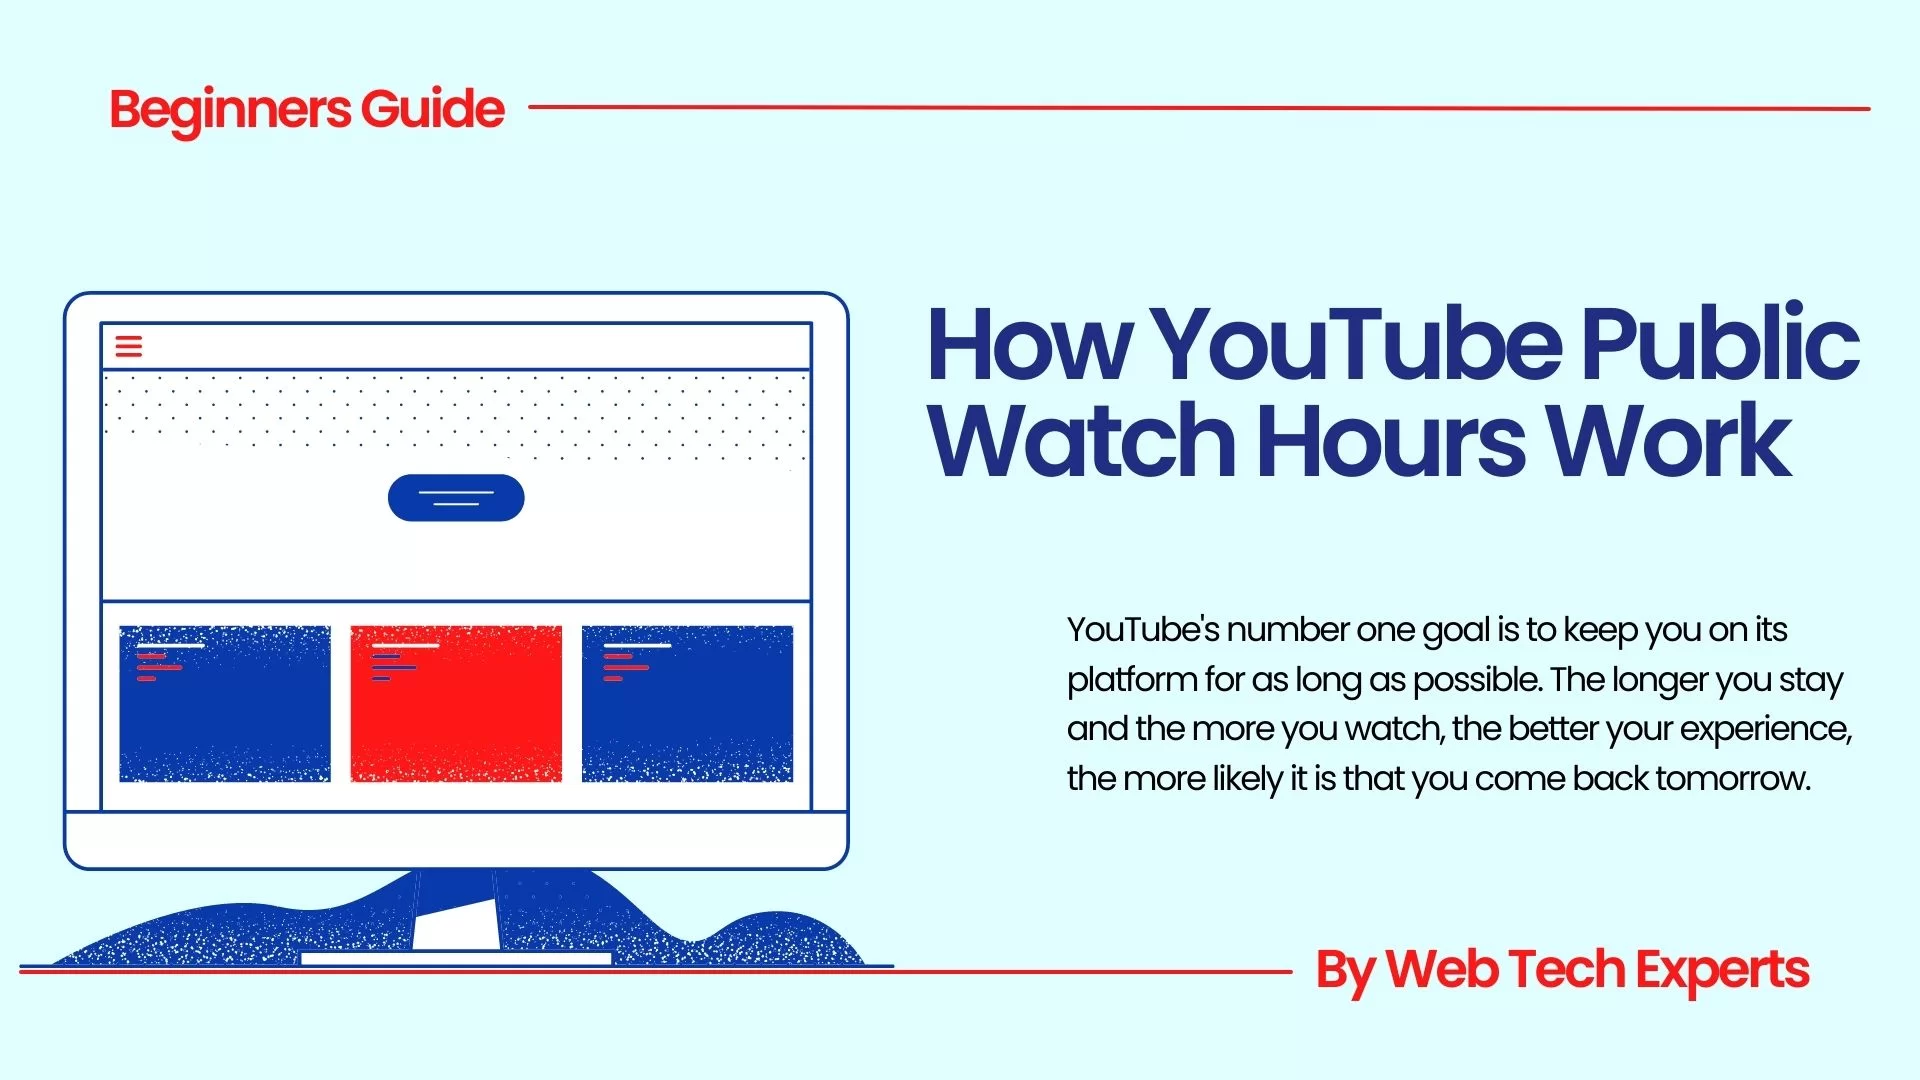 What Are YouTube Public Watch Hours?